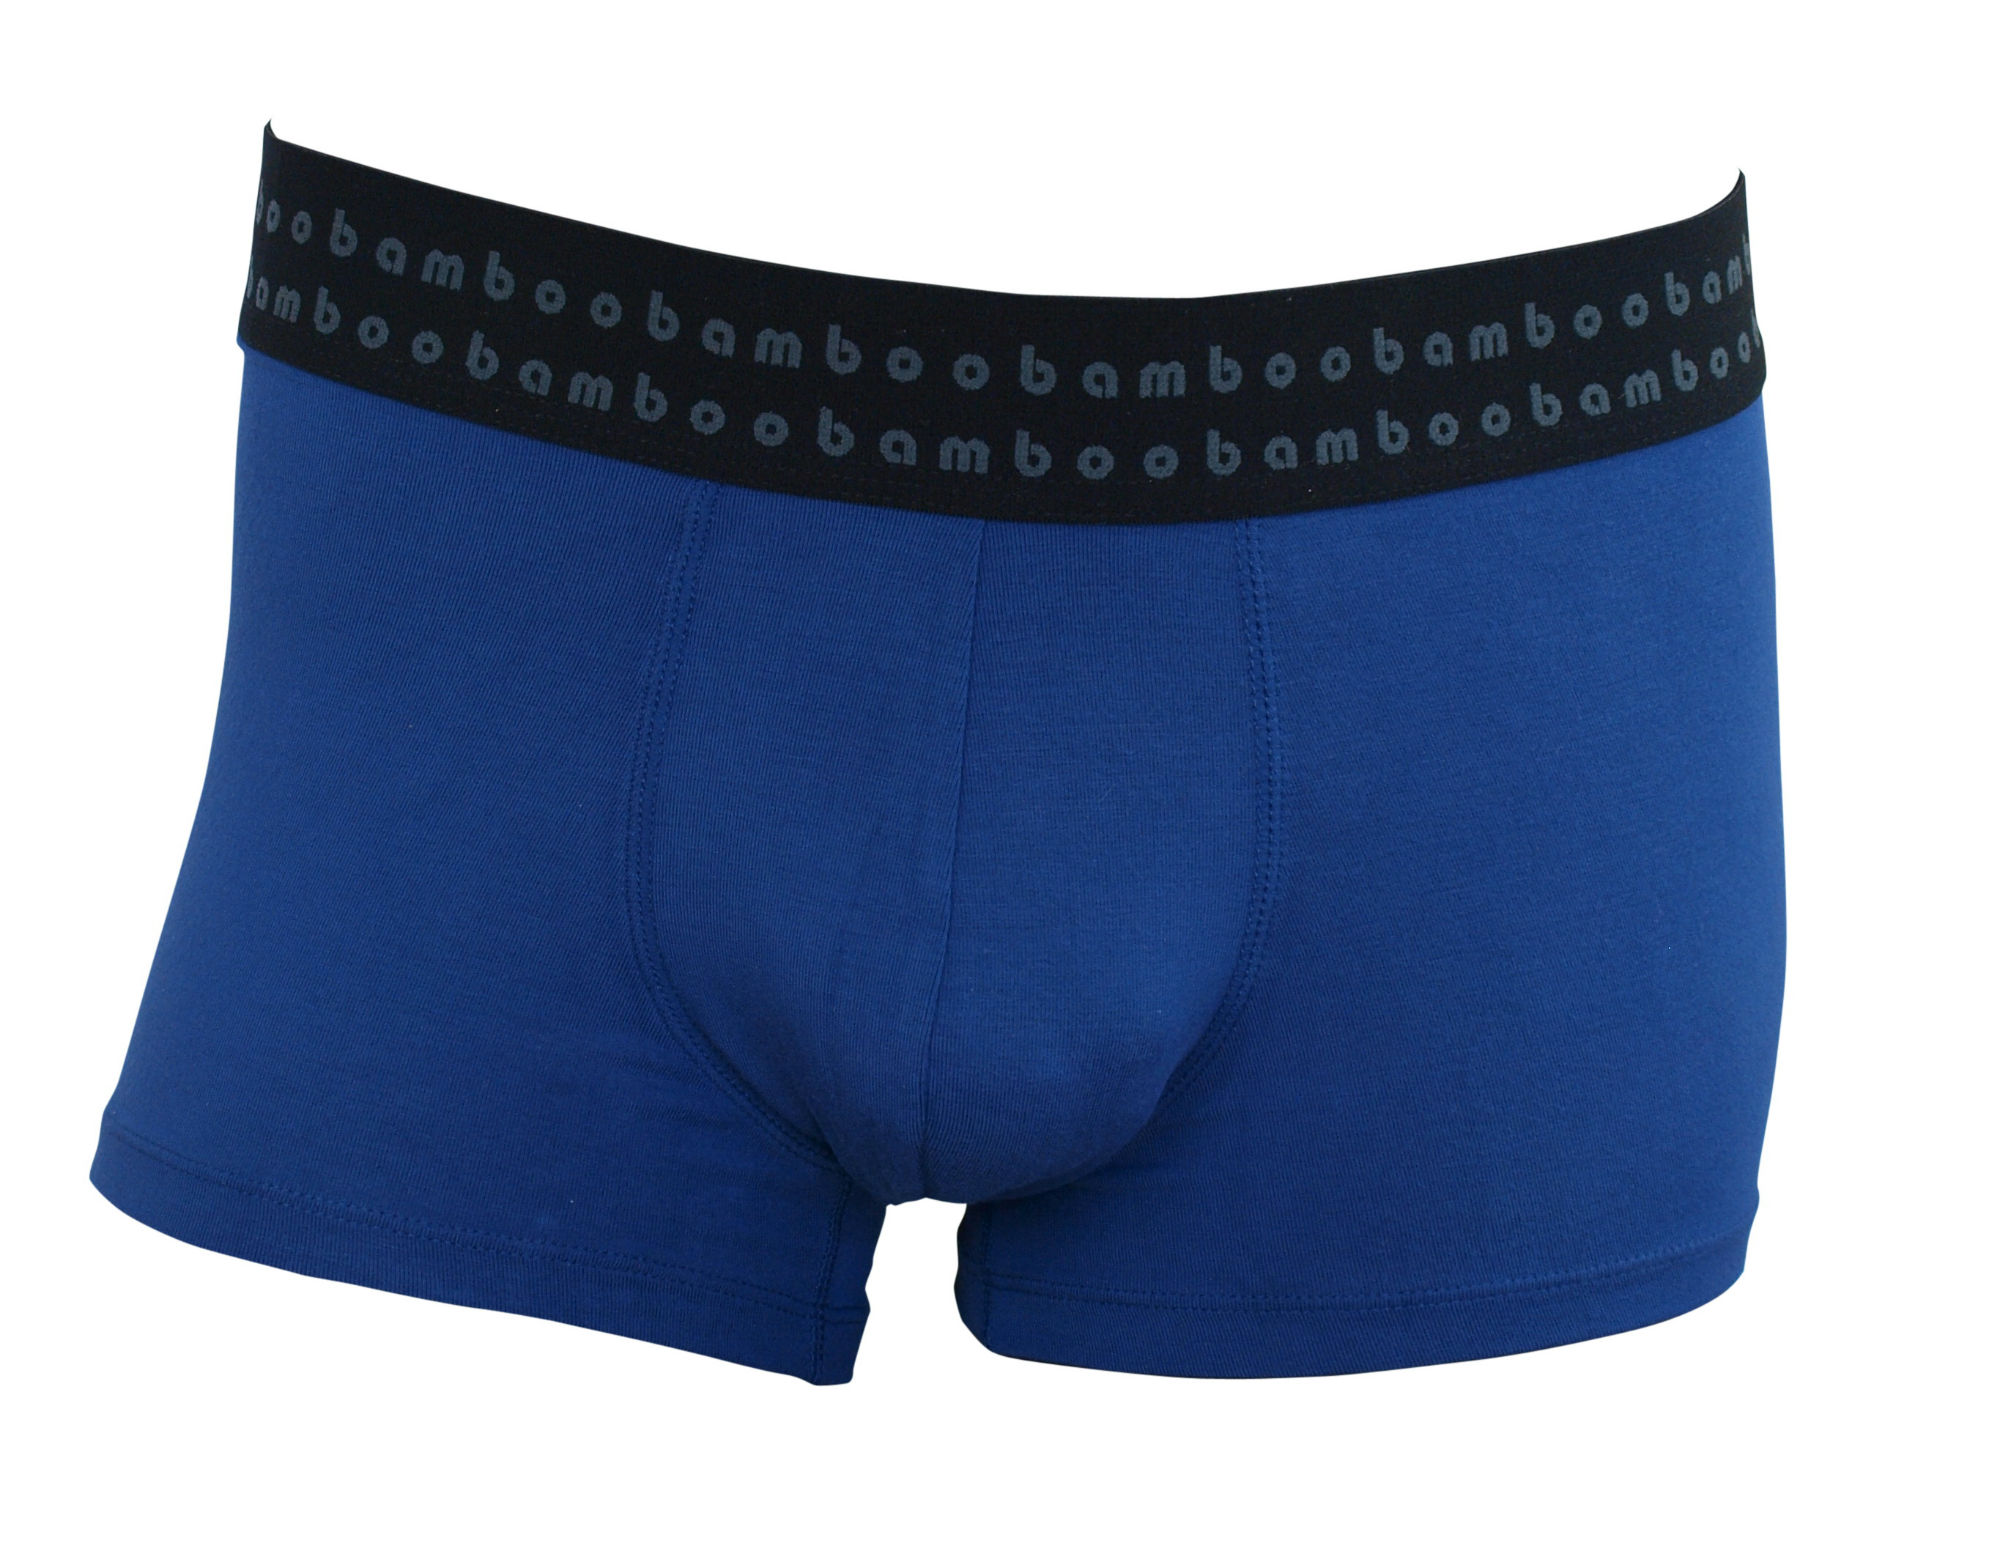 mens jersey boxers - hooked on bamboo